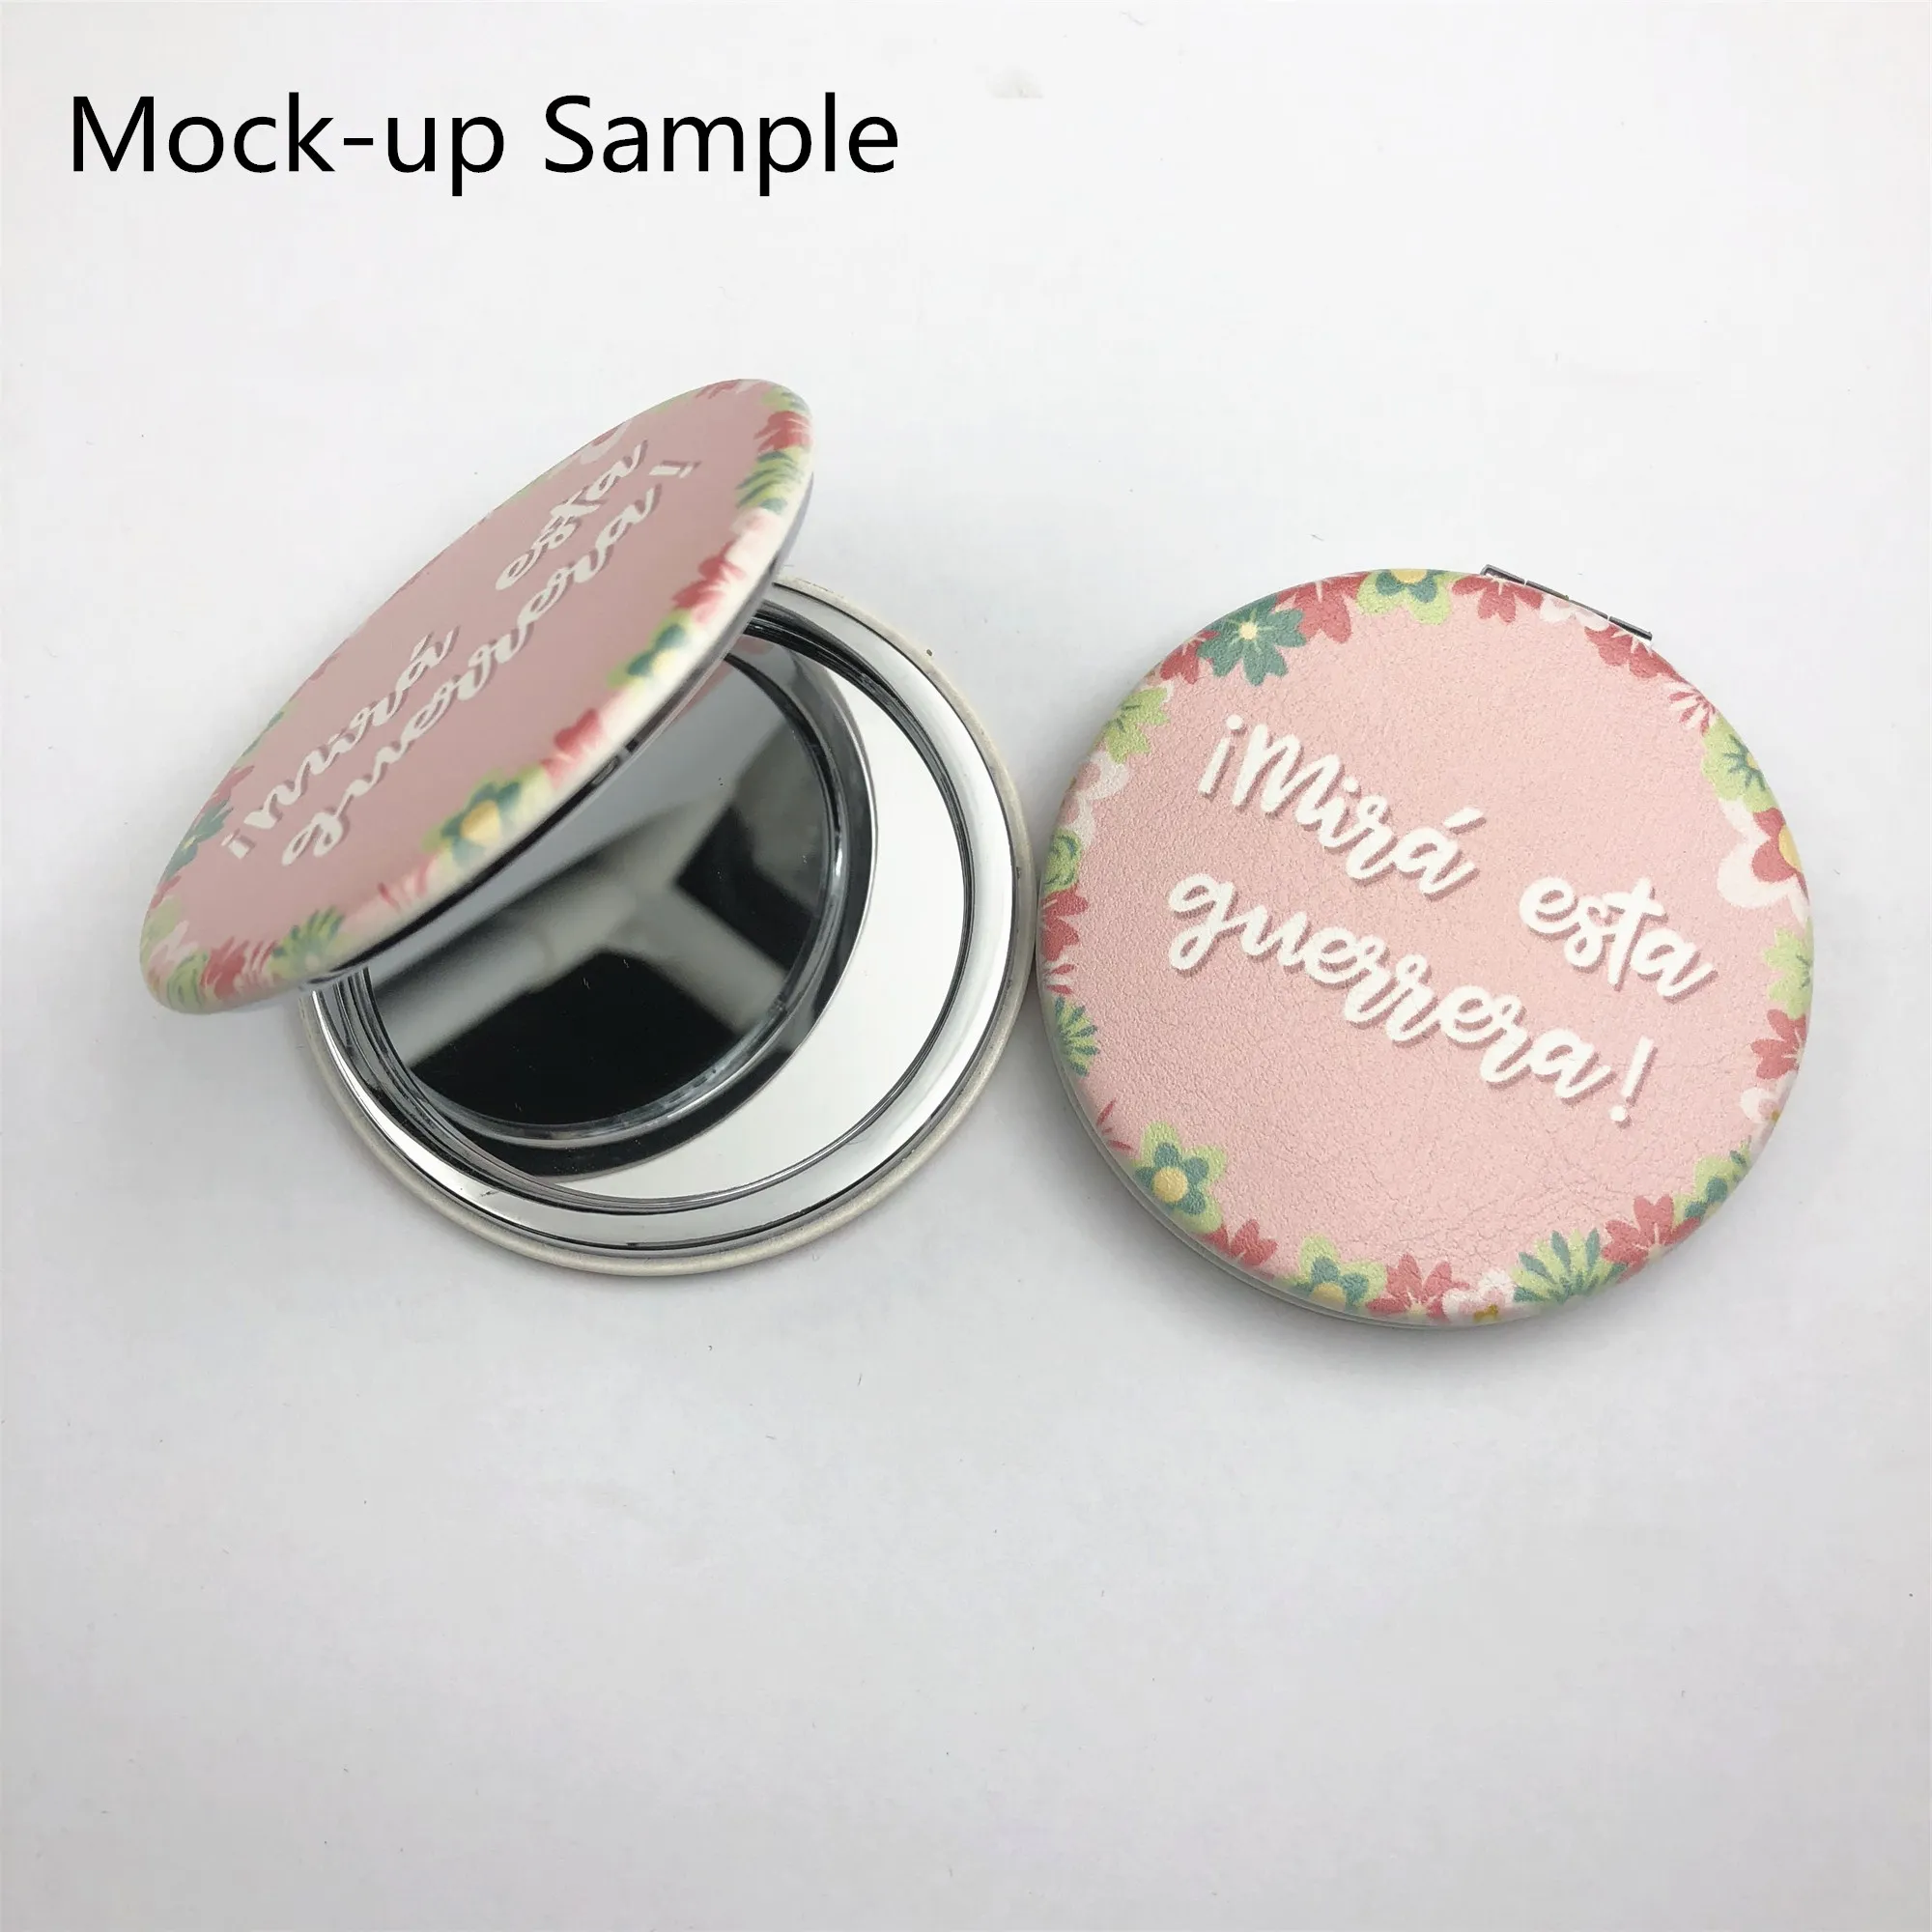 Download Wholesale Black Custom Logo Foldable Diy Compact Mirror Hollywood Plastic Pocket Mirror For Girlfriend Daily Use Or Promotional Buy Foldable Compact Mirror Makeup Mirror Custom Pocket Mirror Wholesale Pocket Mirrors Product On Alibaba Com